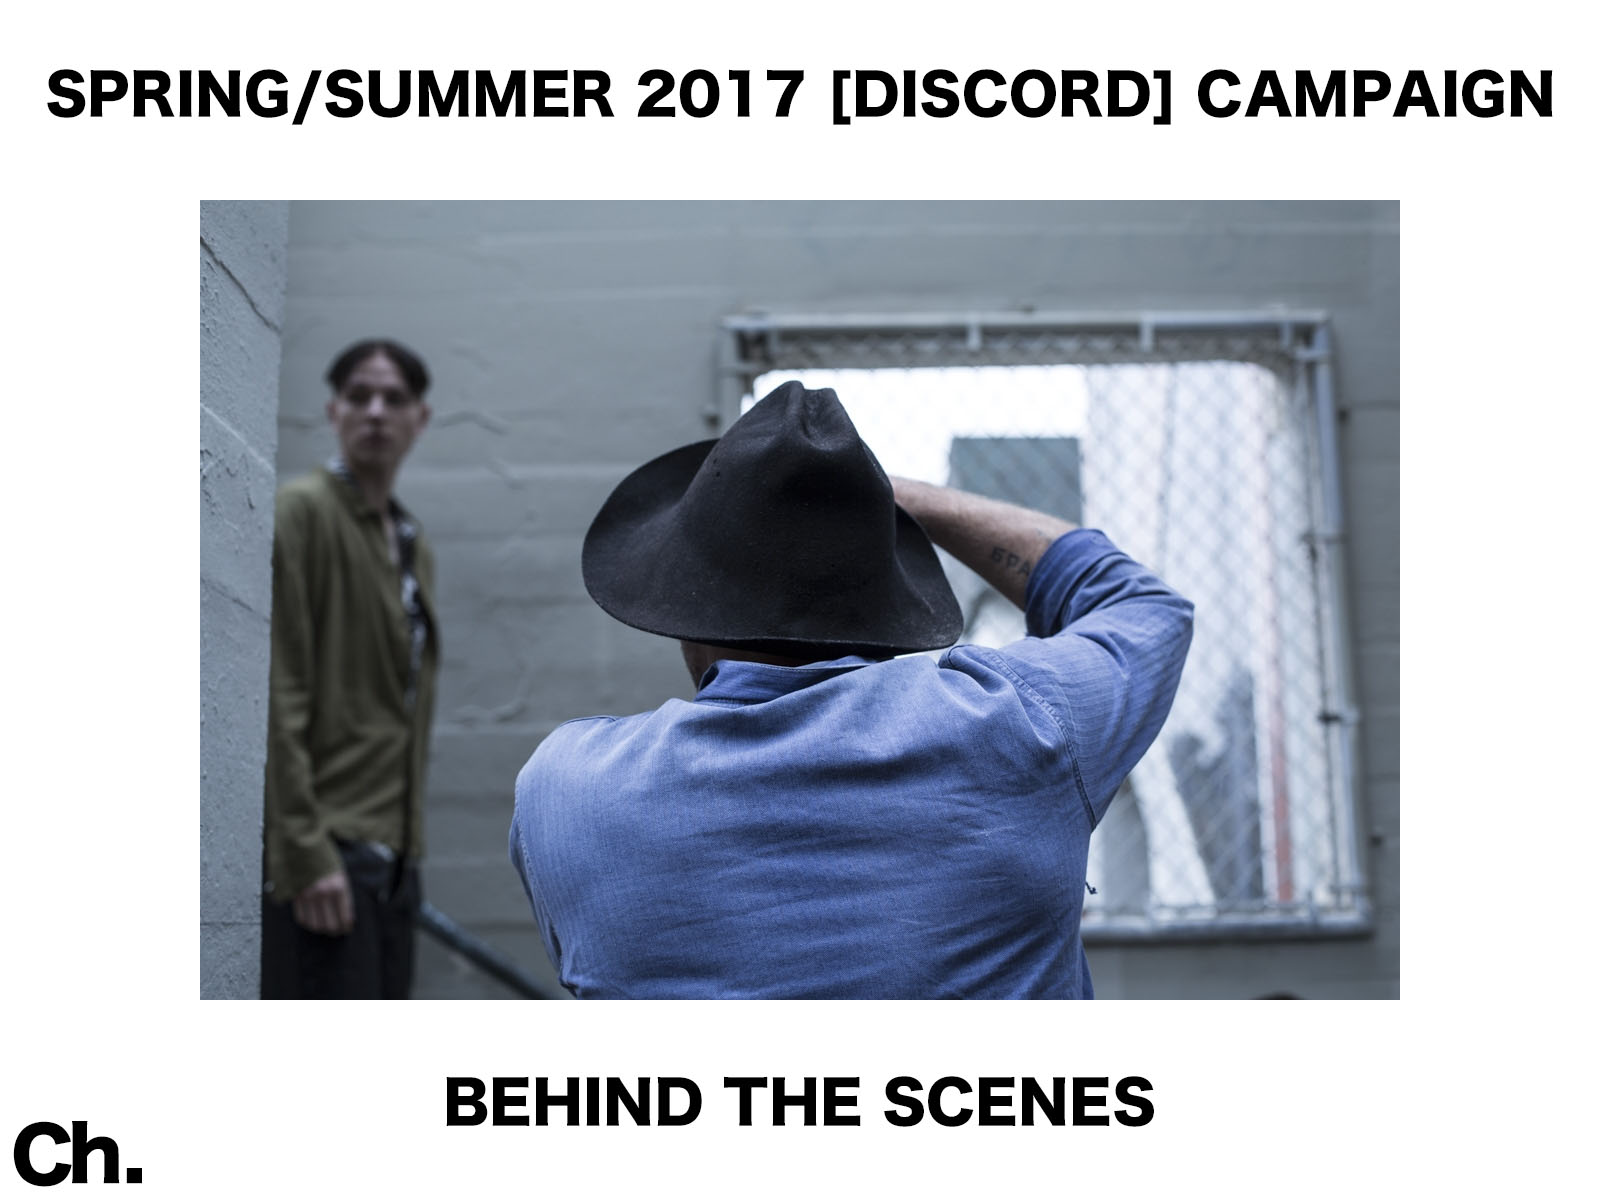 BEHIND THE SCENES:  CHAPTER SPRING/SUMMER 2017 [DISCORD] CAMPAIGN